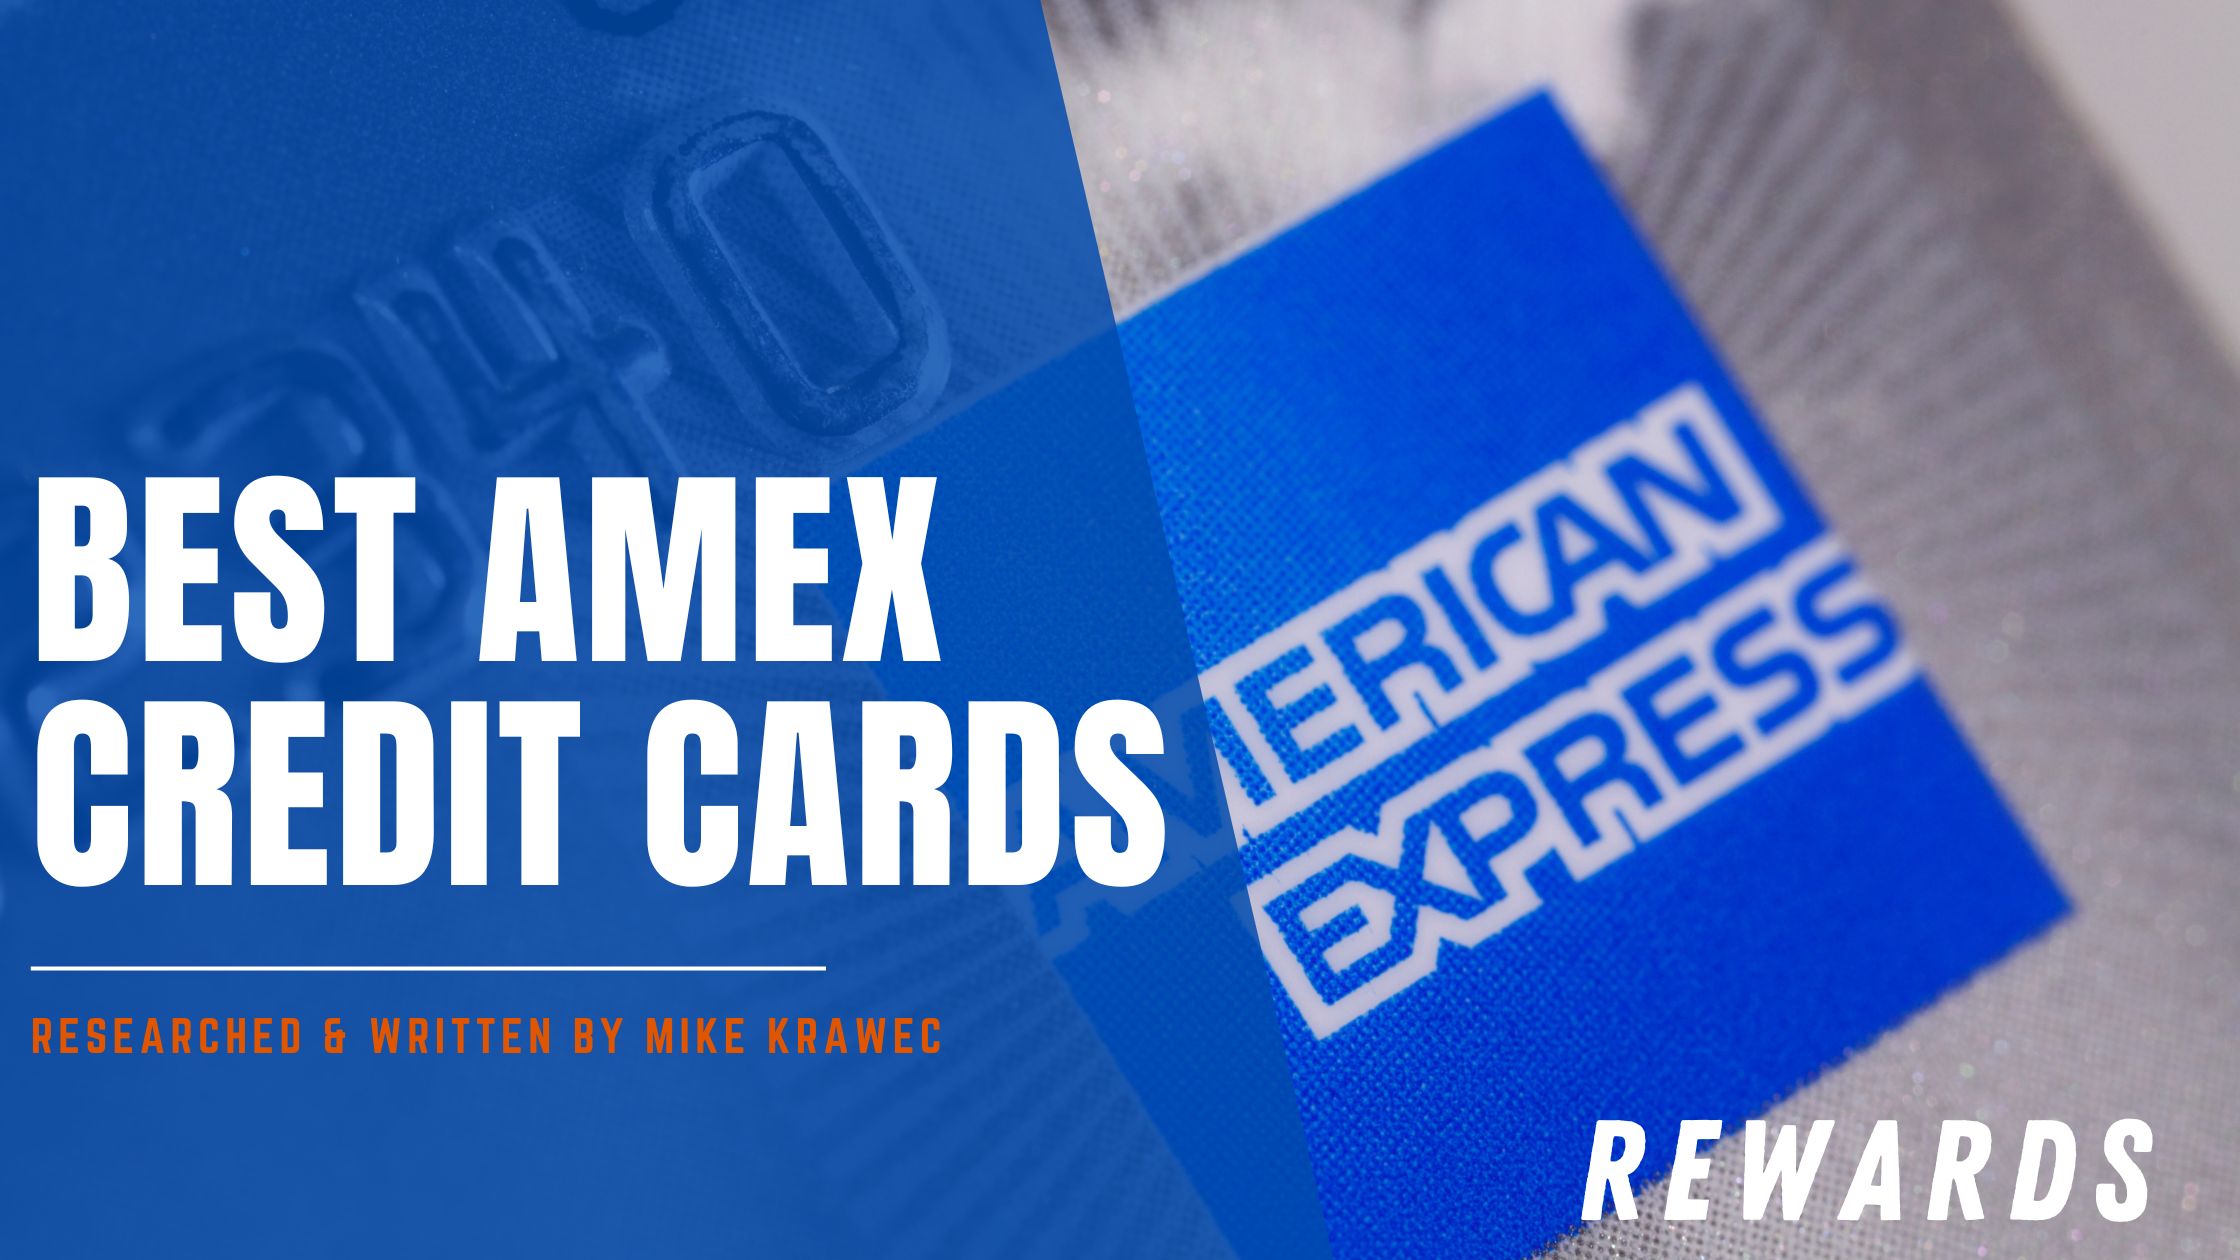 American Express Credit Cards featured image